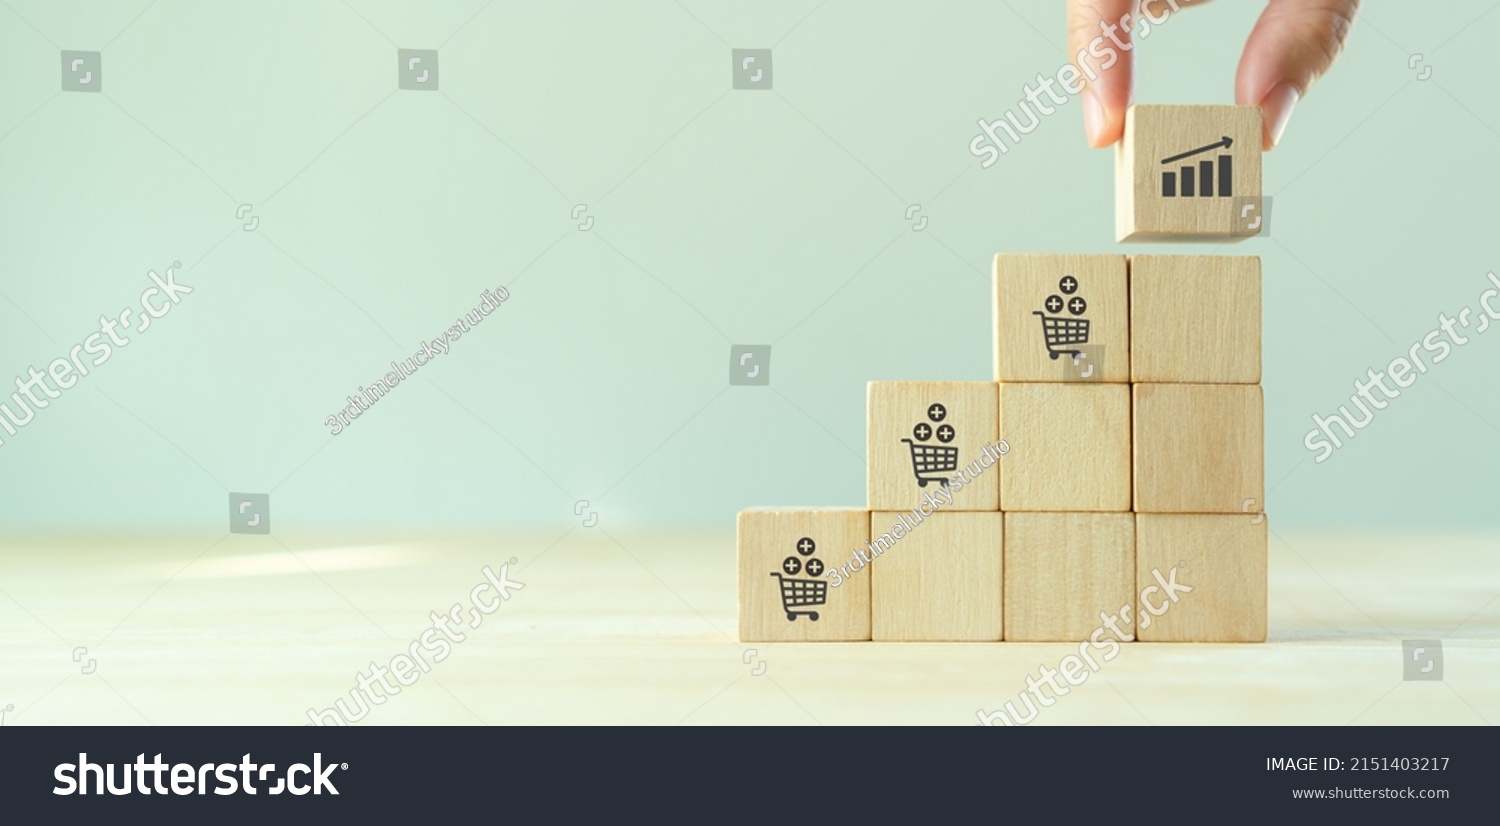 Growth of sales, average order value (AOV) concept. Strategy to get more money per oder. Increase sales in online store, e-commerce. Stacking wooden cubes with sales growth on grey background. #2151403217